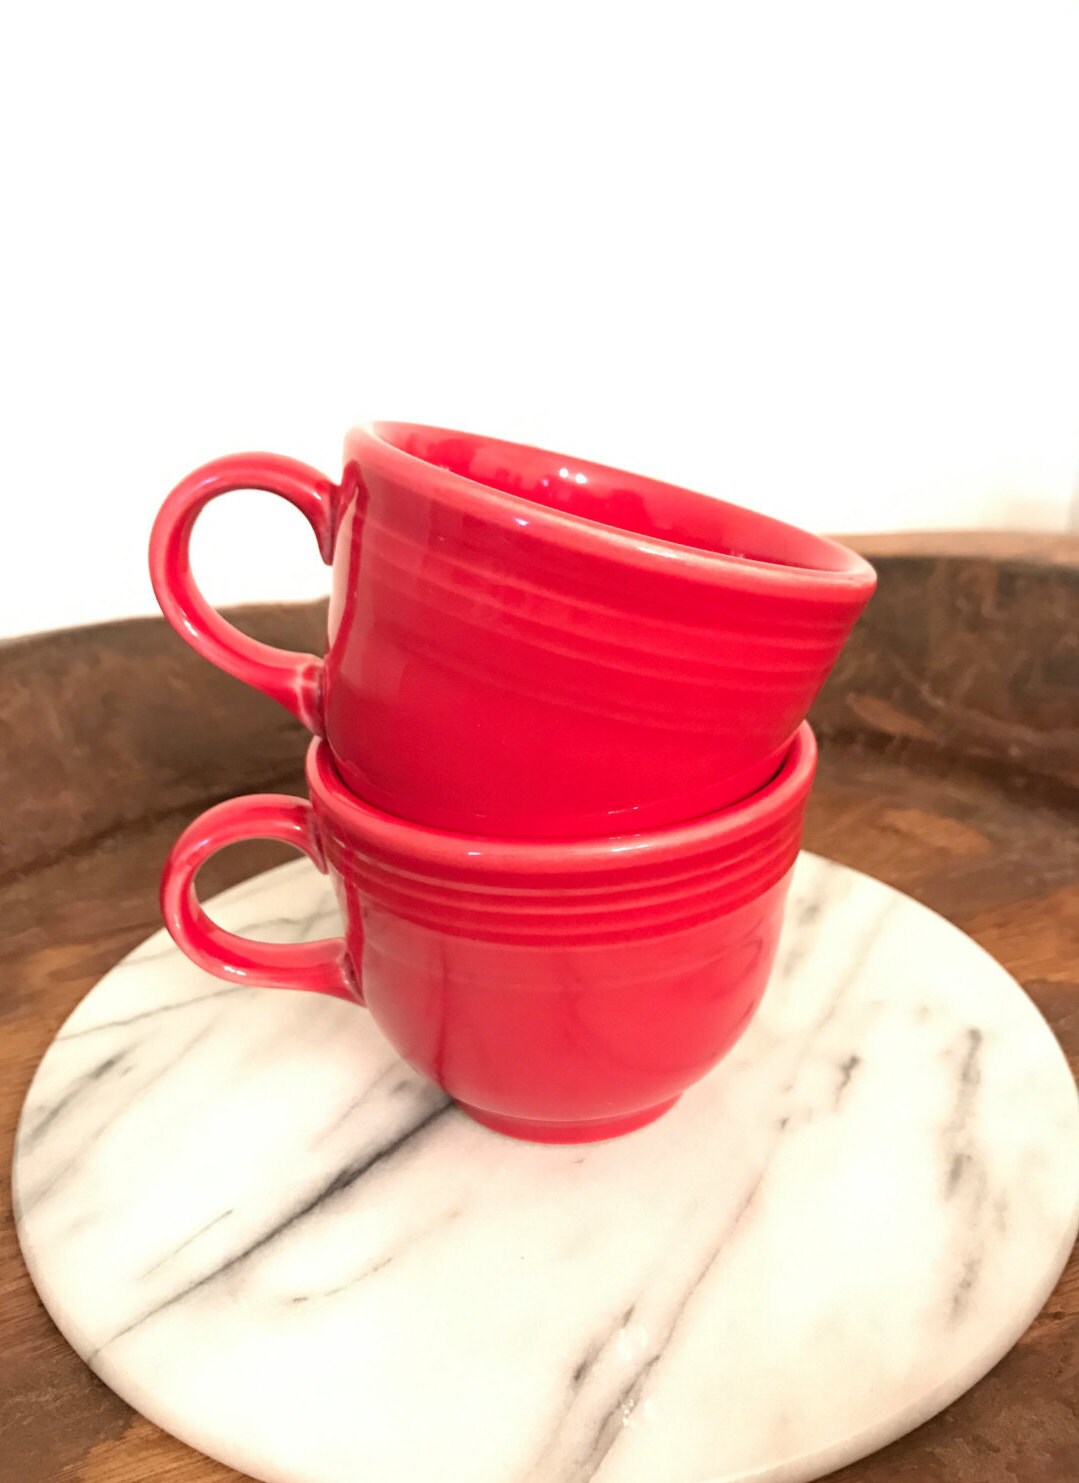 Fiesta Ware Tapered Mugs Scarlet Red Set of 2 Coffee Cup Made in